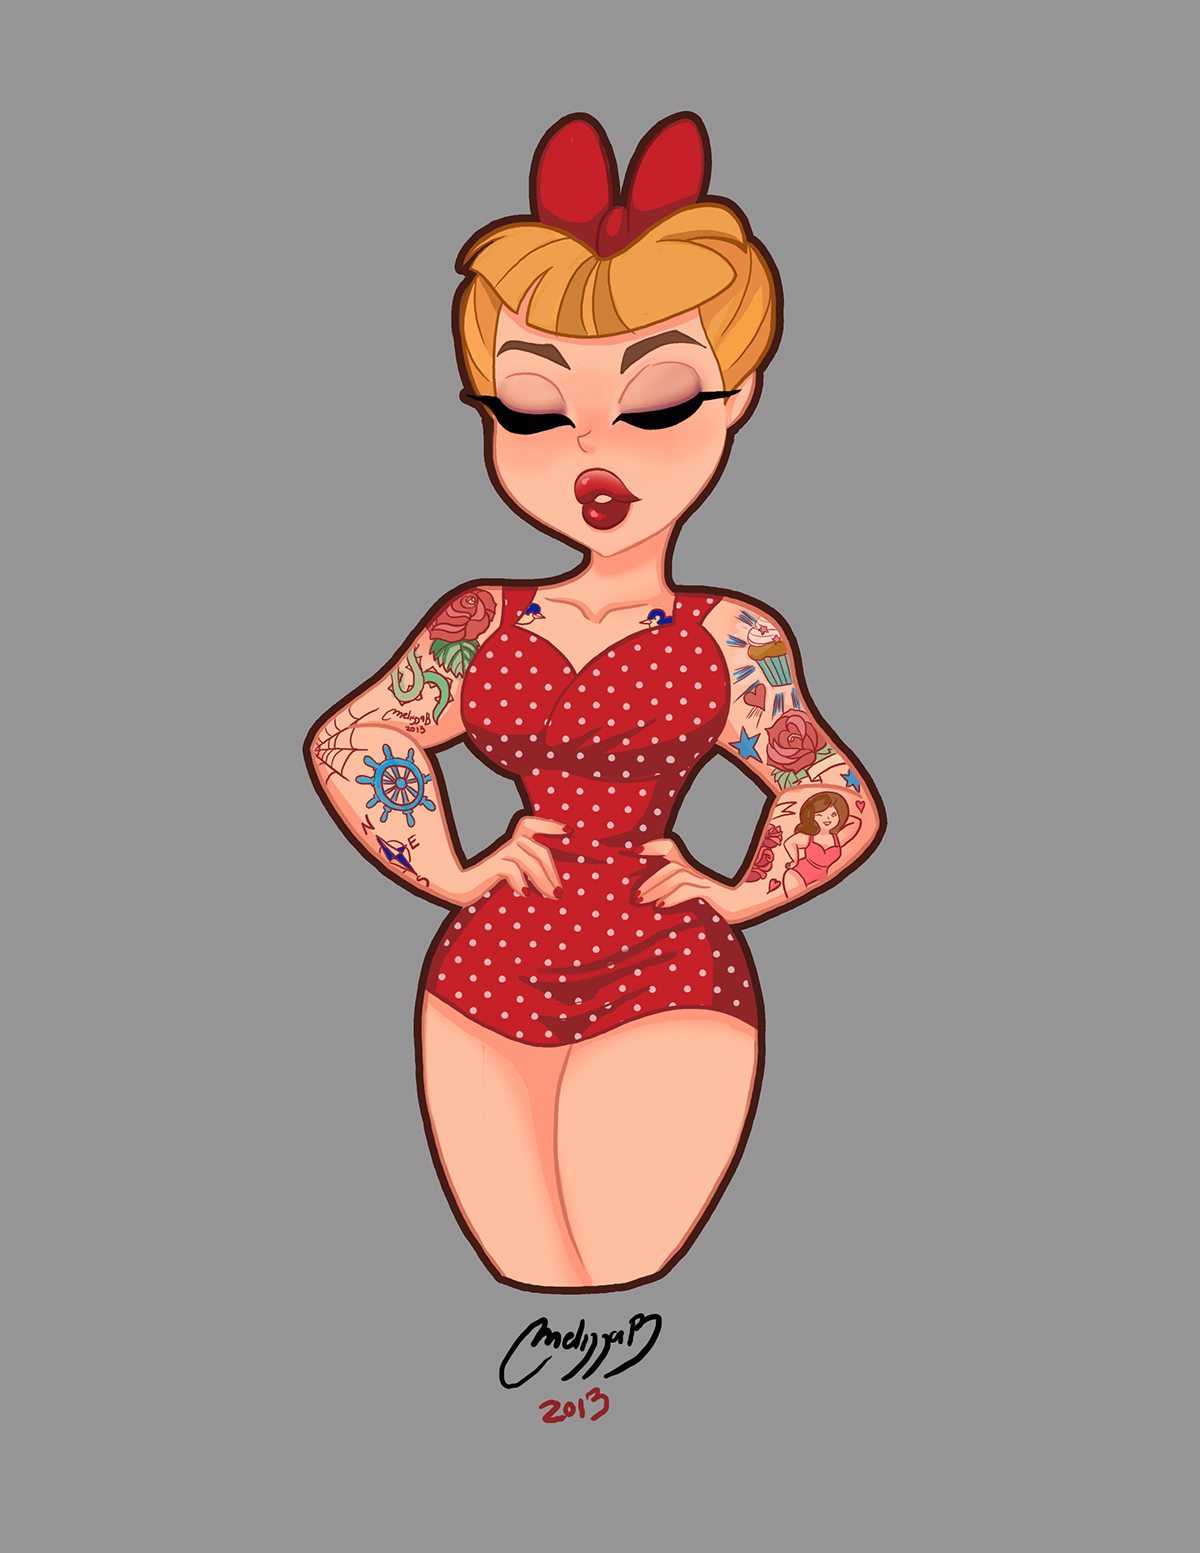 red and grey pin up rocabilly Rockabilly tattoo sexy girl red dress melissa ballesteros p melivillosa